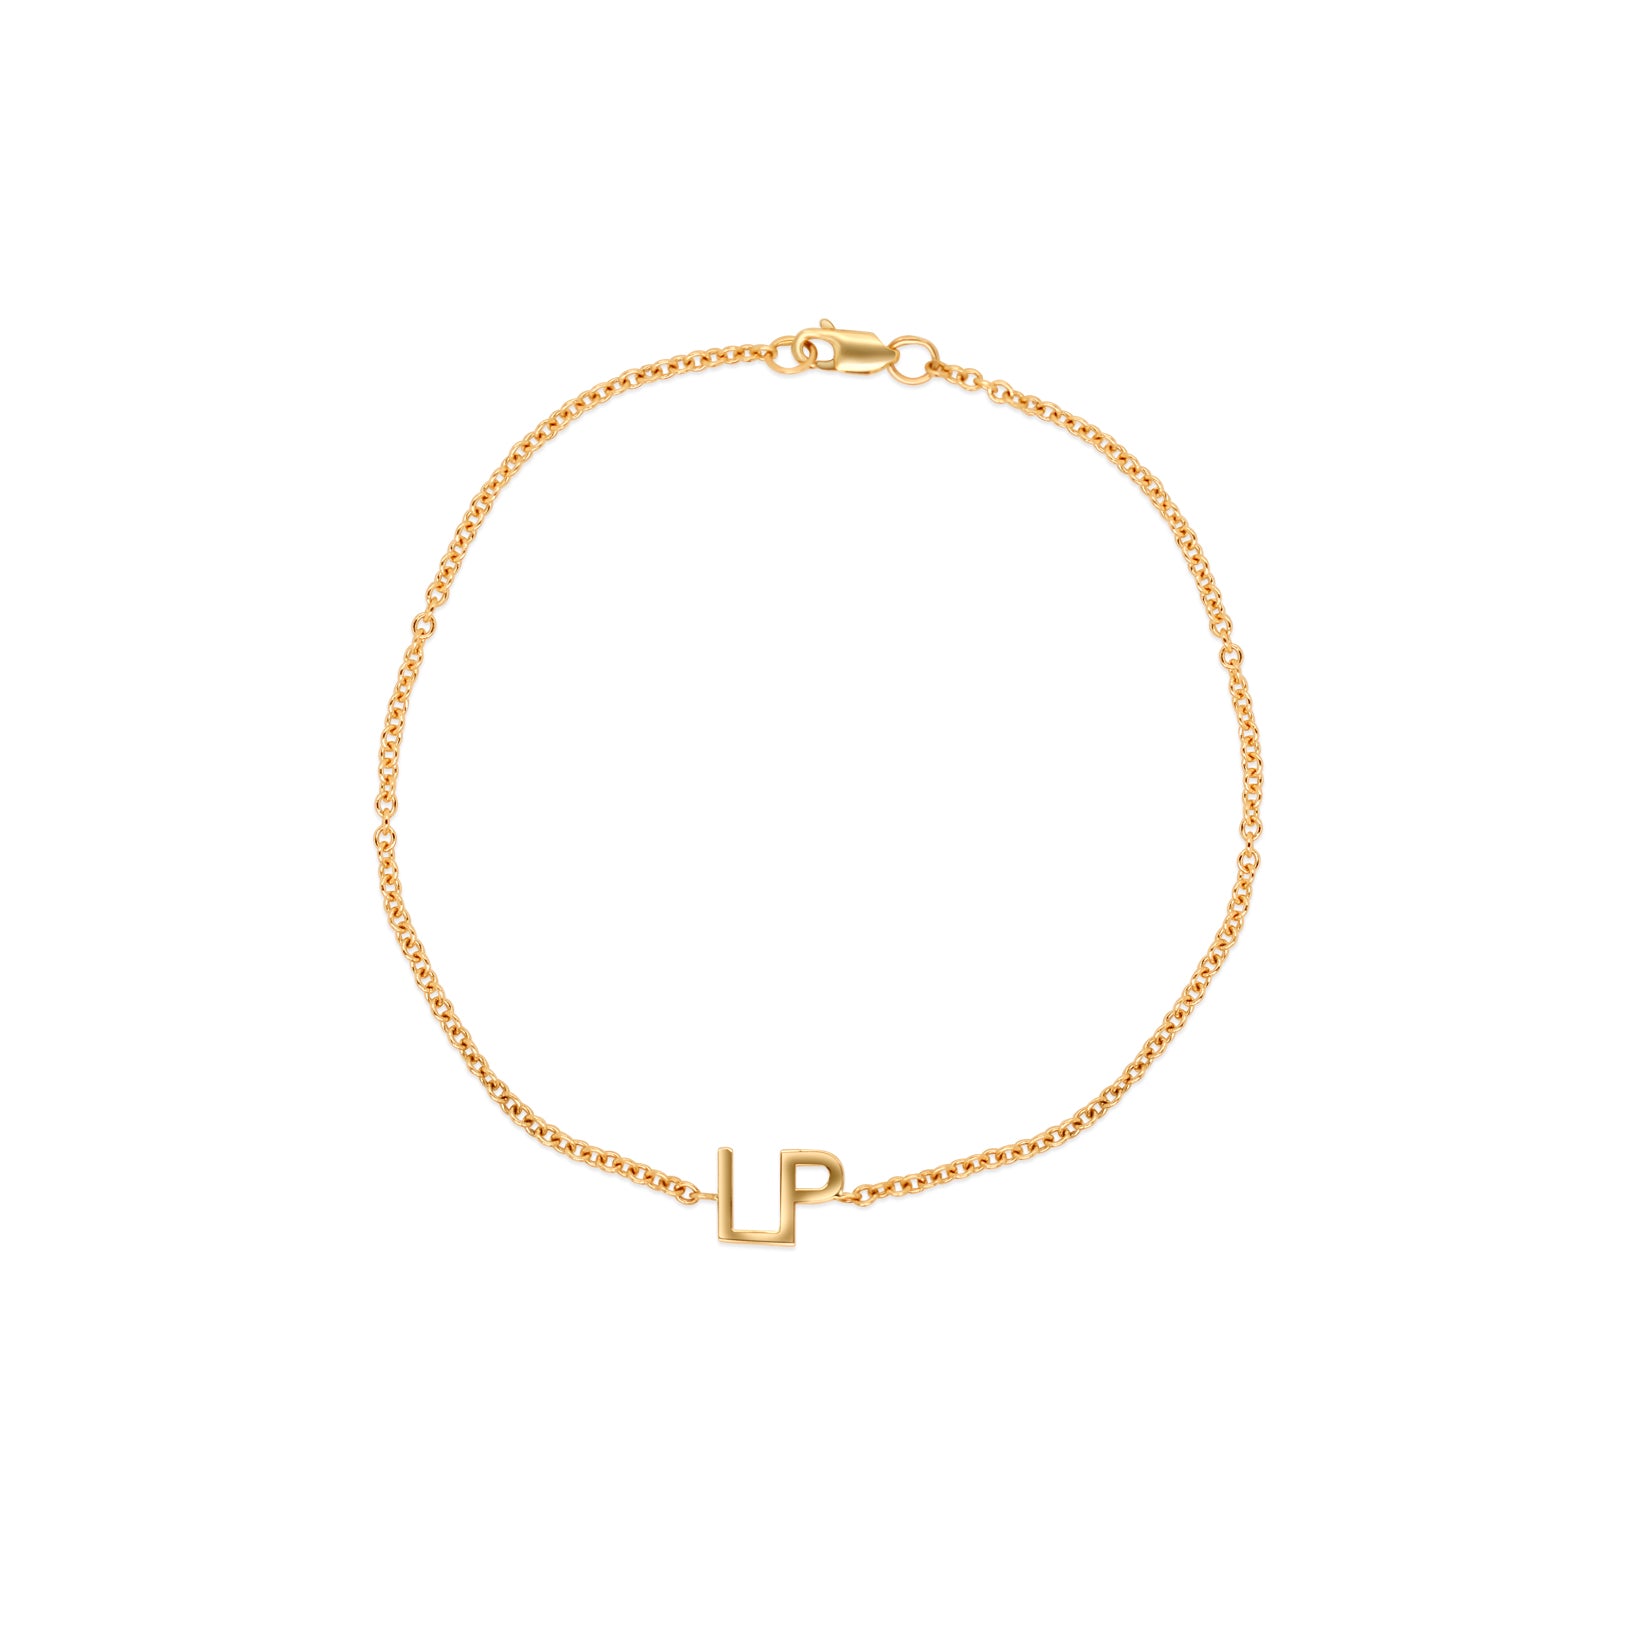 14k gold two letter initials personalized bracelet